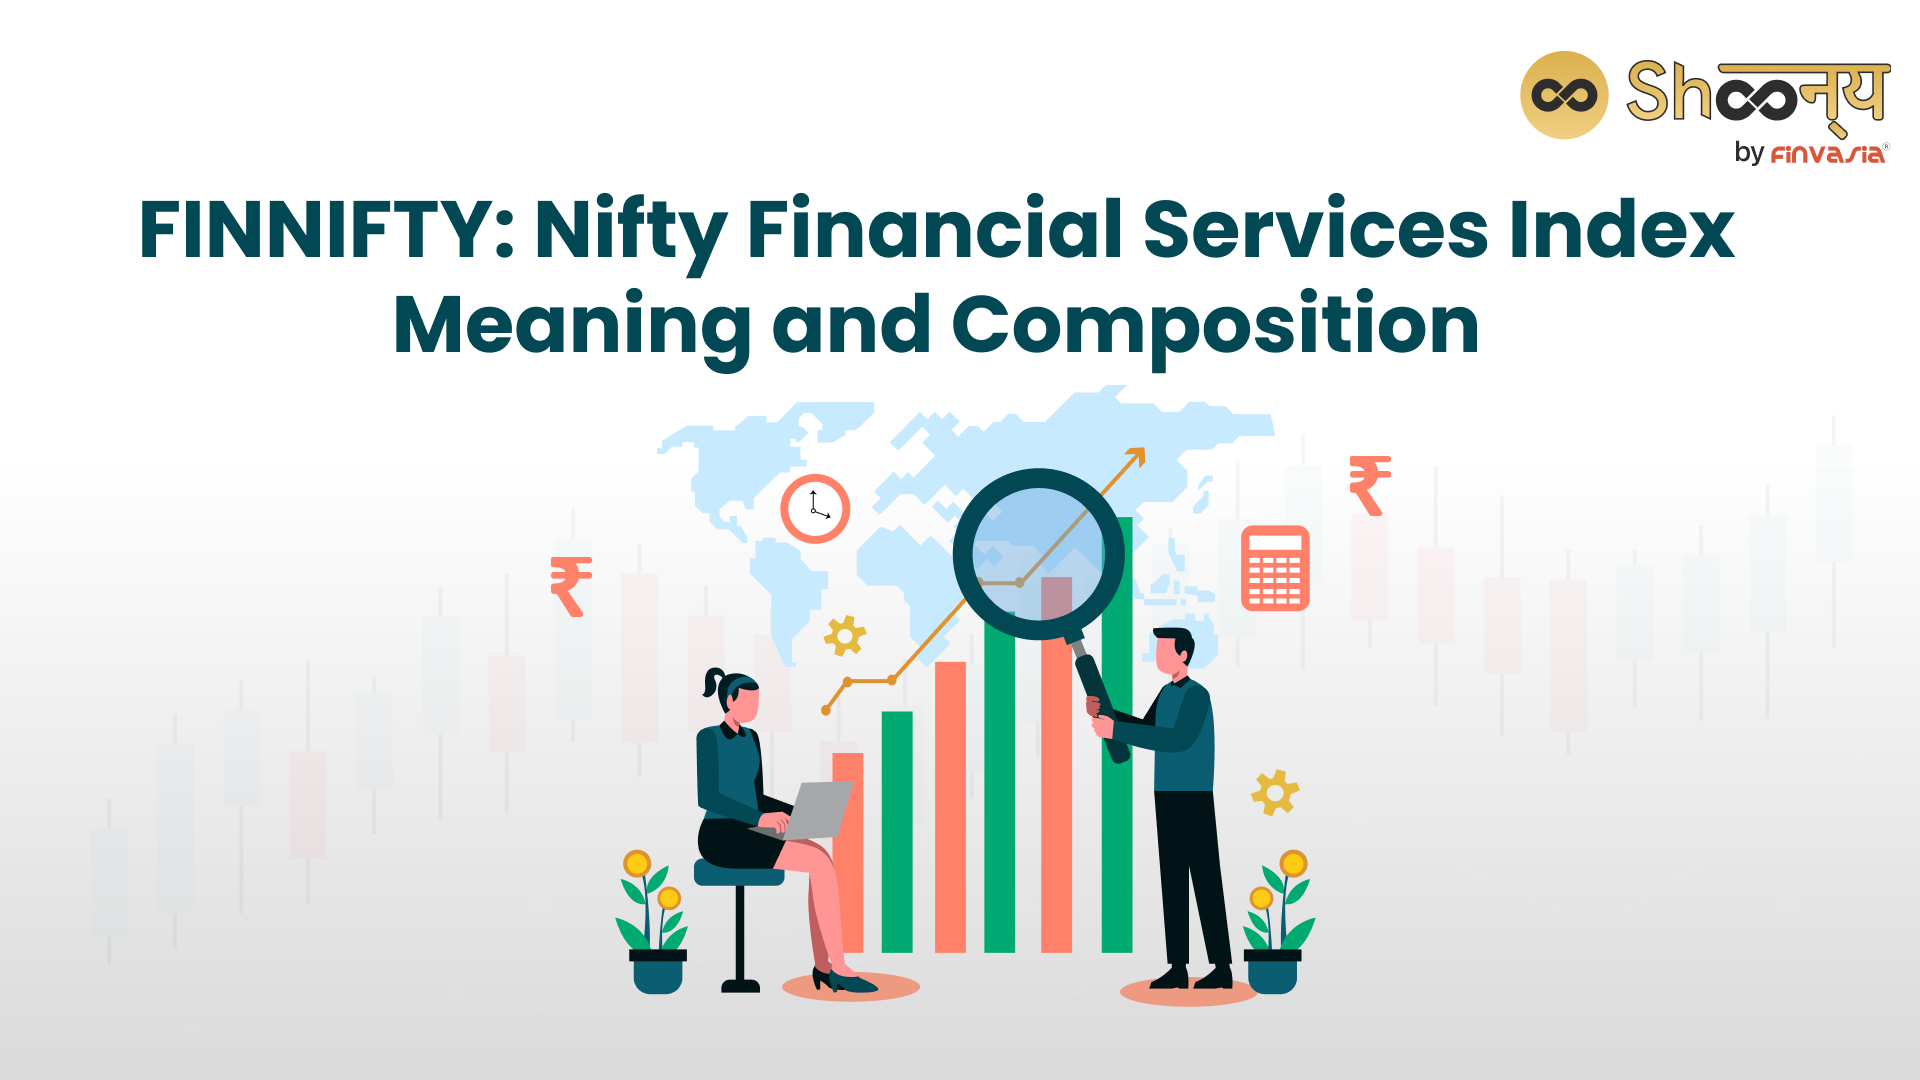 What is FINNIFTY: Nifty Financial Services Index